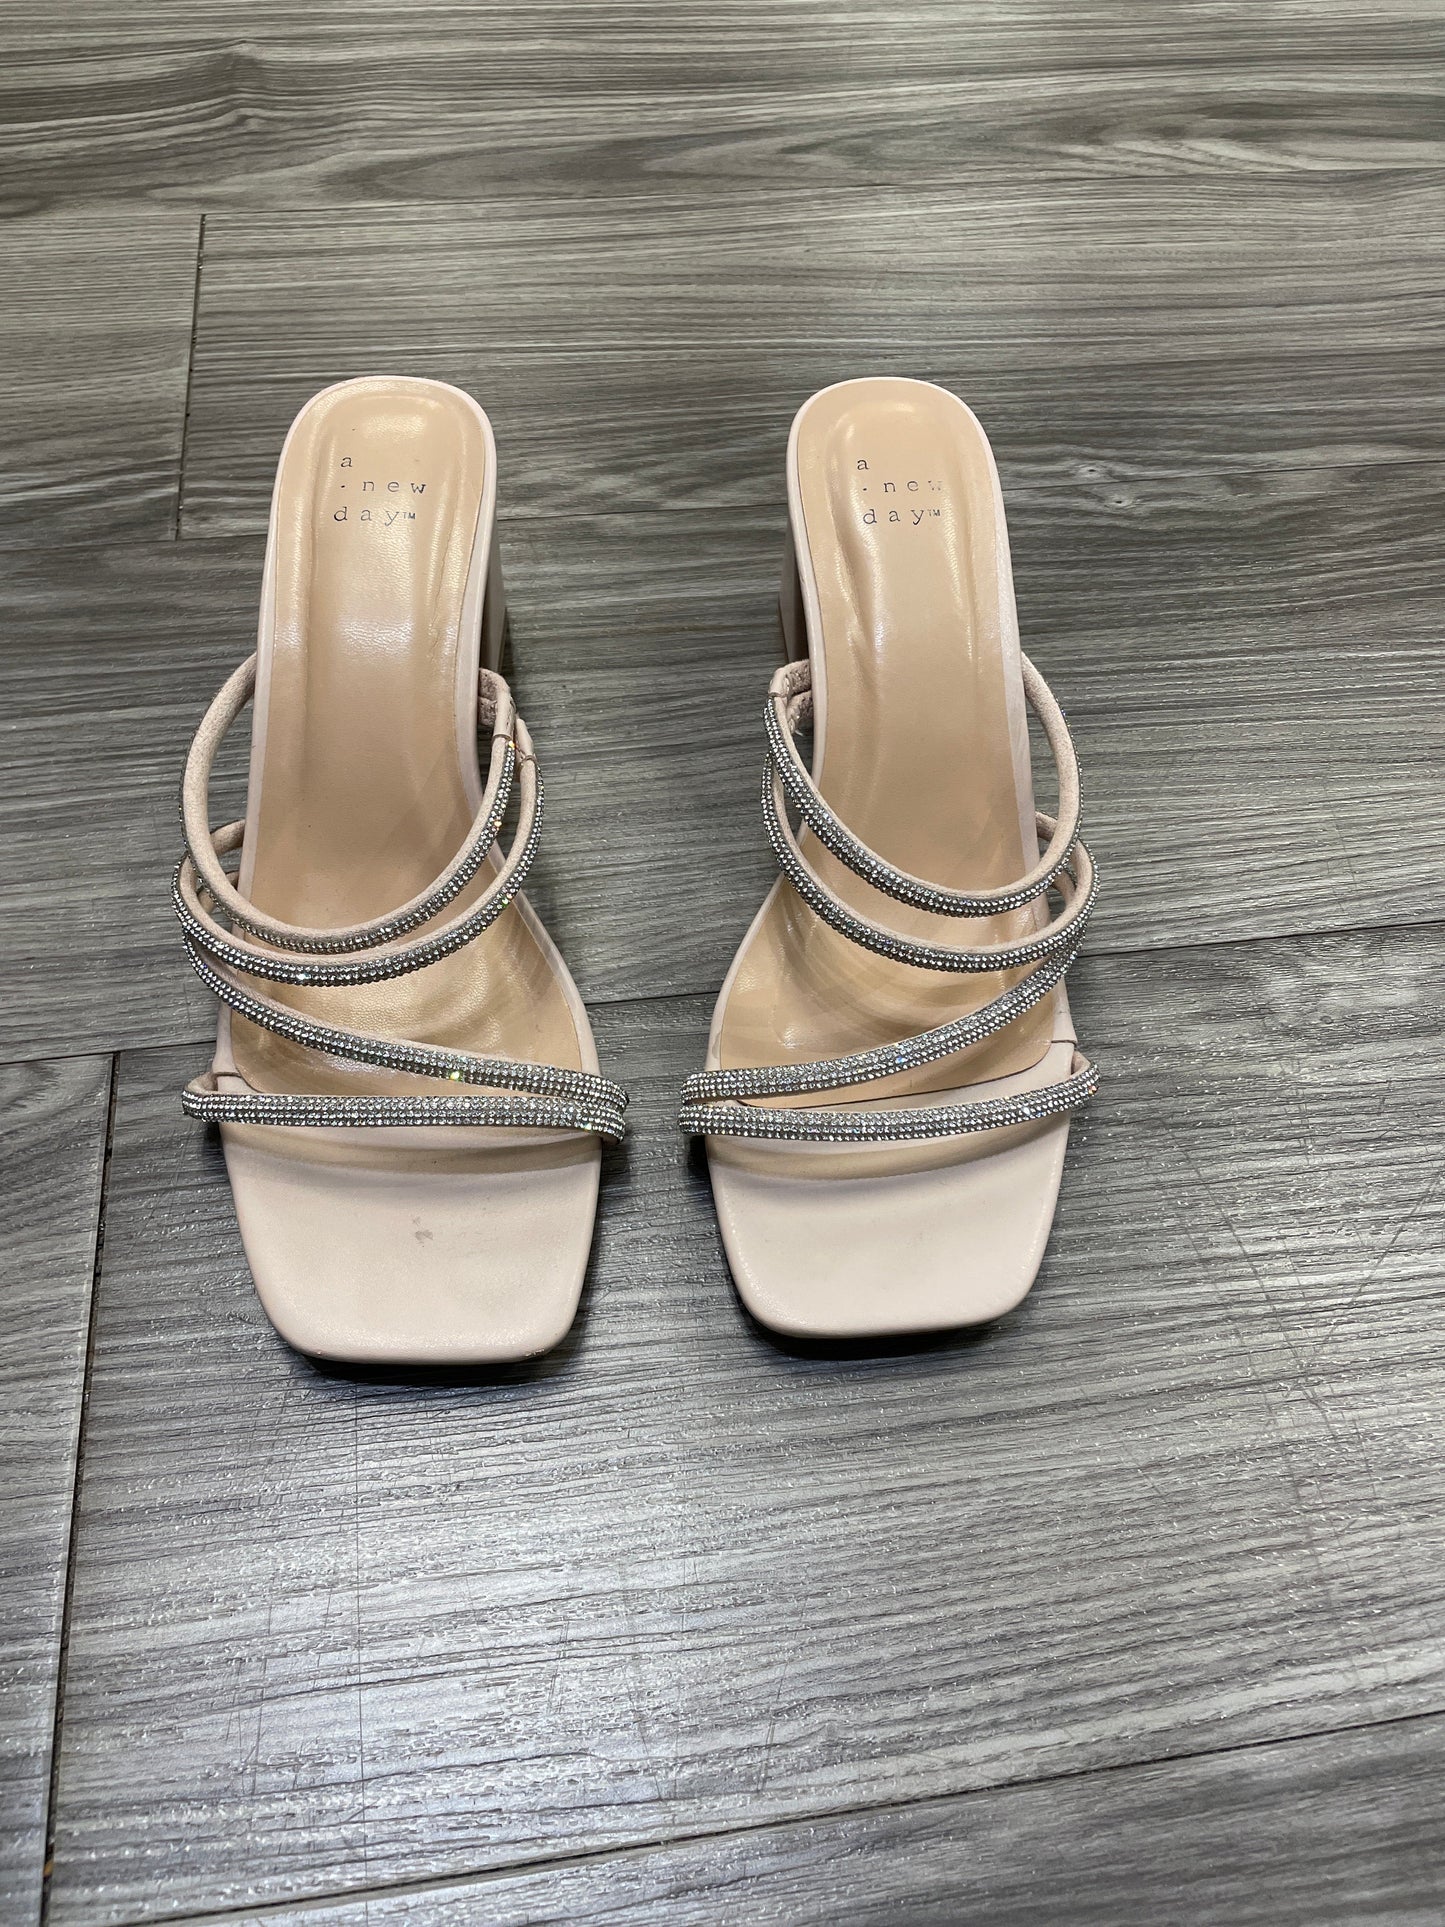 Beige Shoes Heels Block A New Day, Size 8